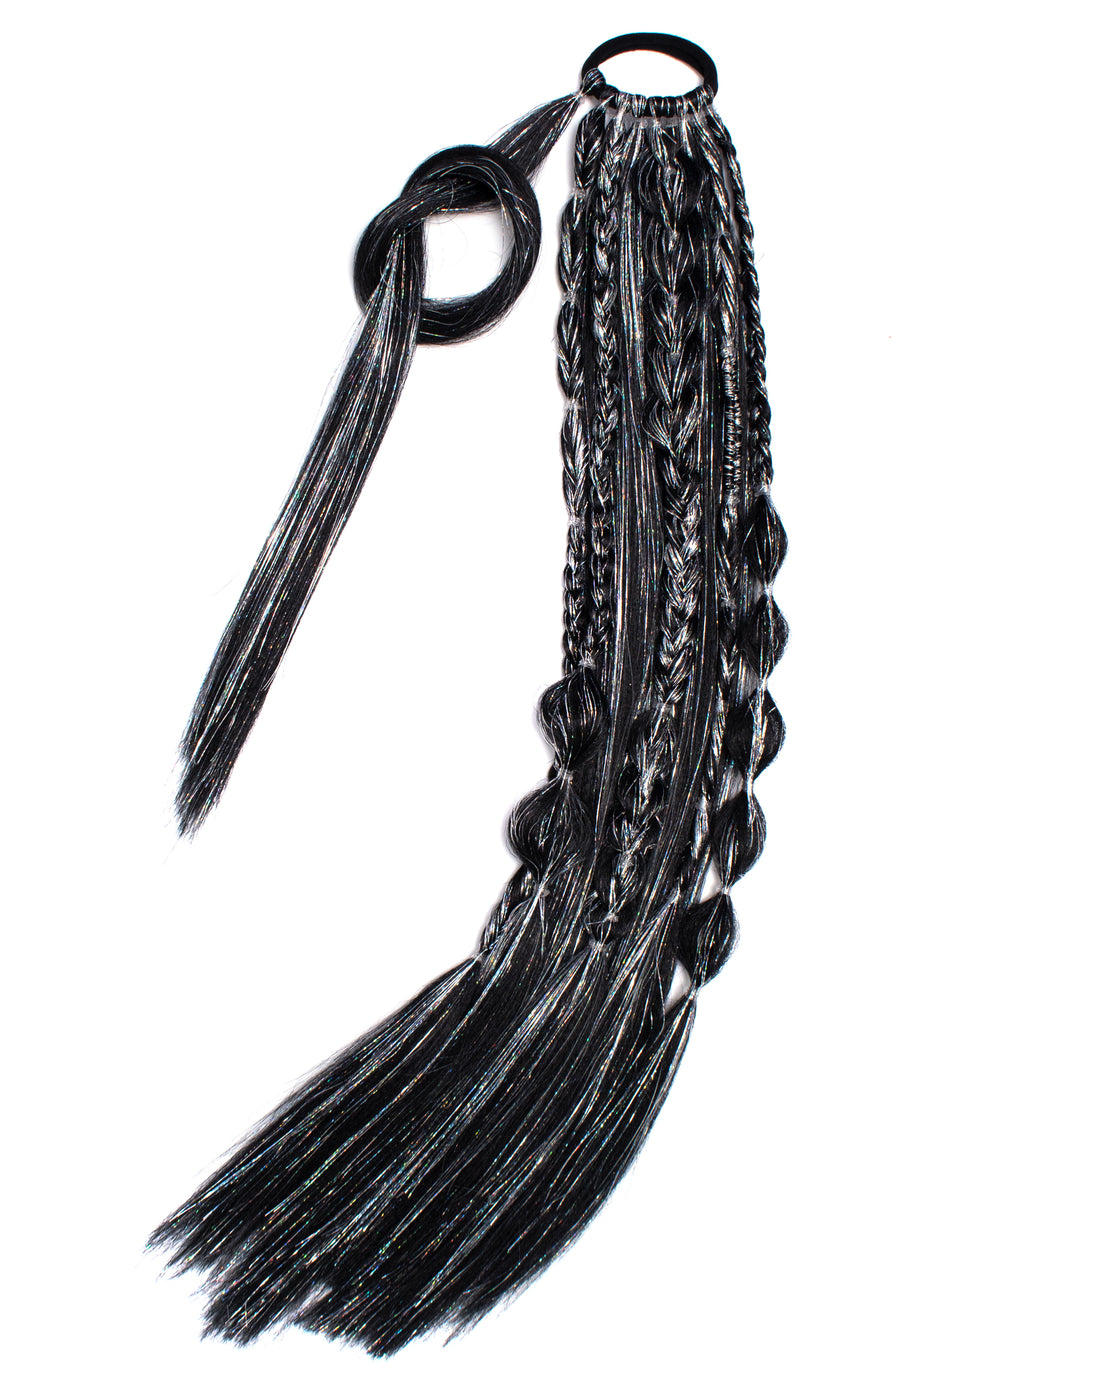 Sirius - Black Braided Ponytail Extension with Holographic Tinsel